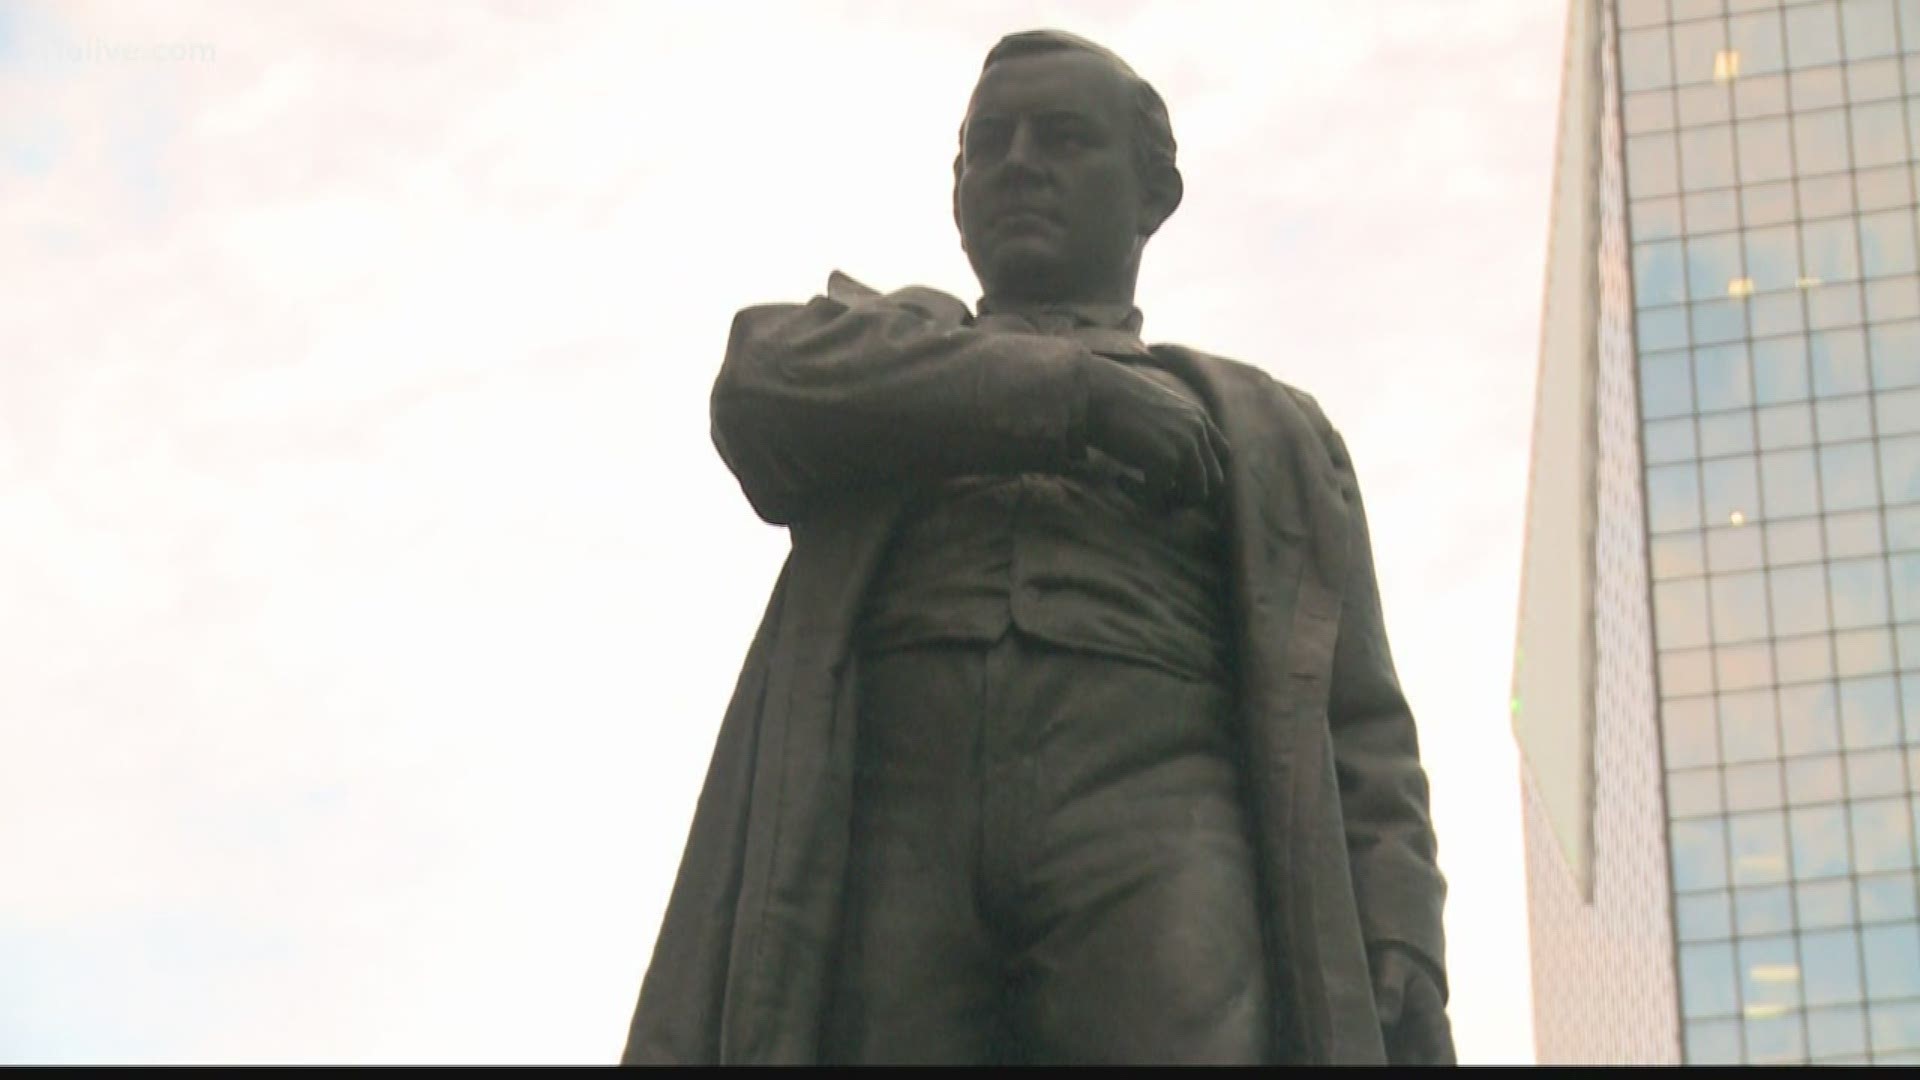 The students want the removal of a statue of the ubiquitous Atlanta historical figure.